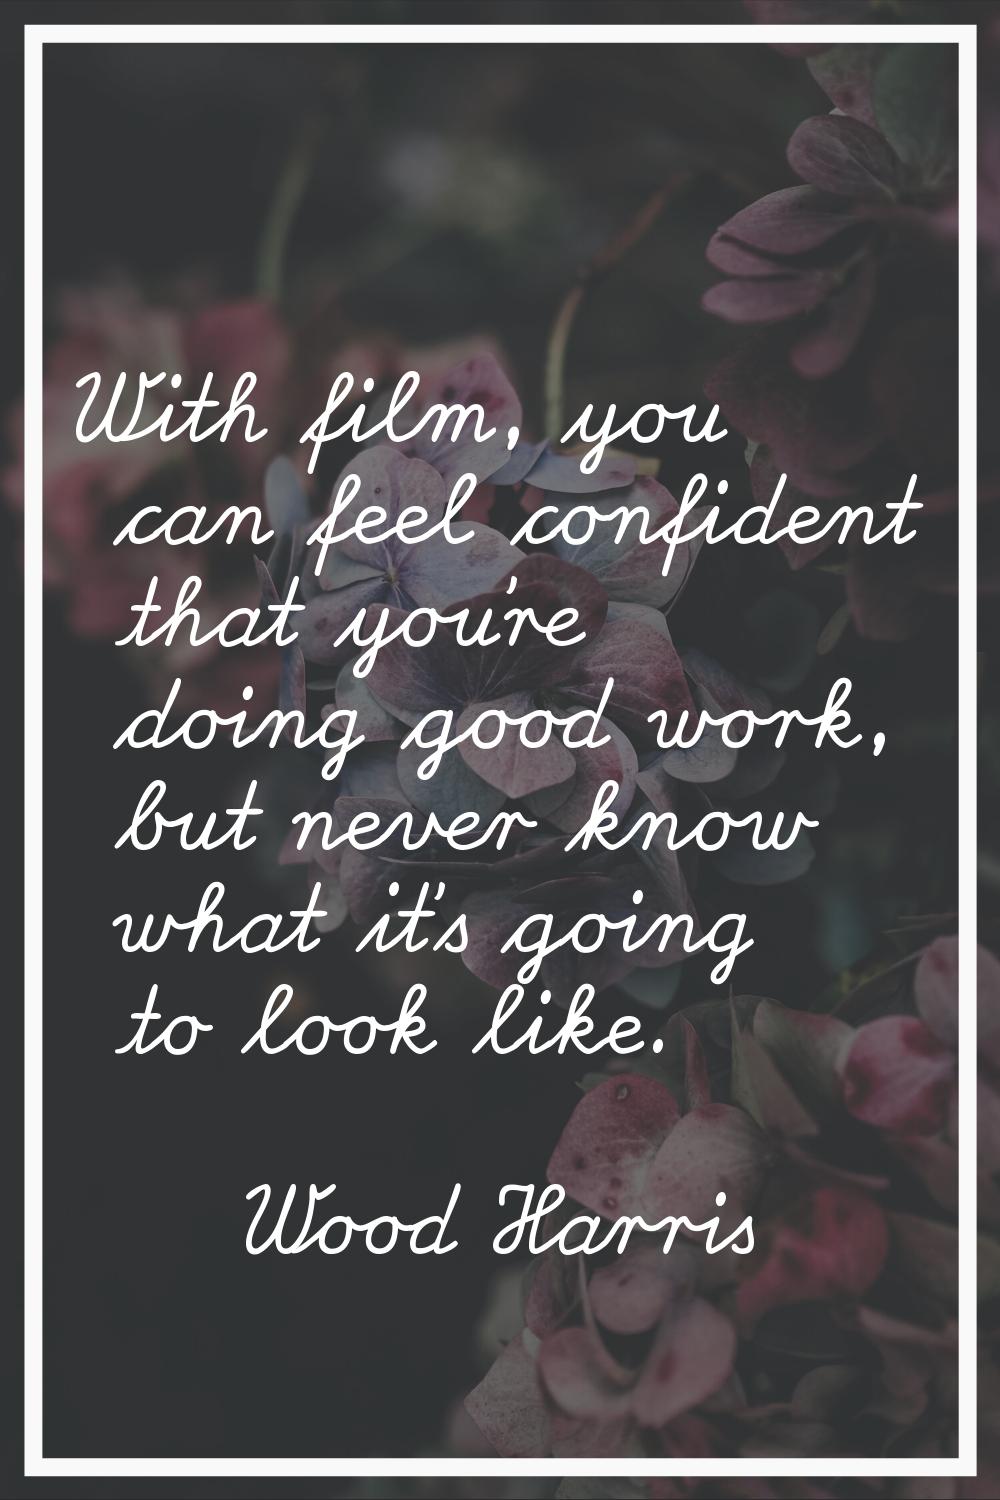 With film, you can feel confident that you're doing good work, but never know what it's going to lo